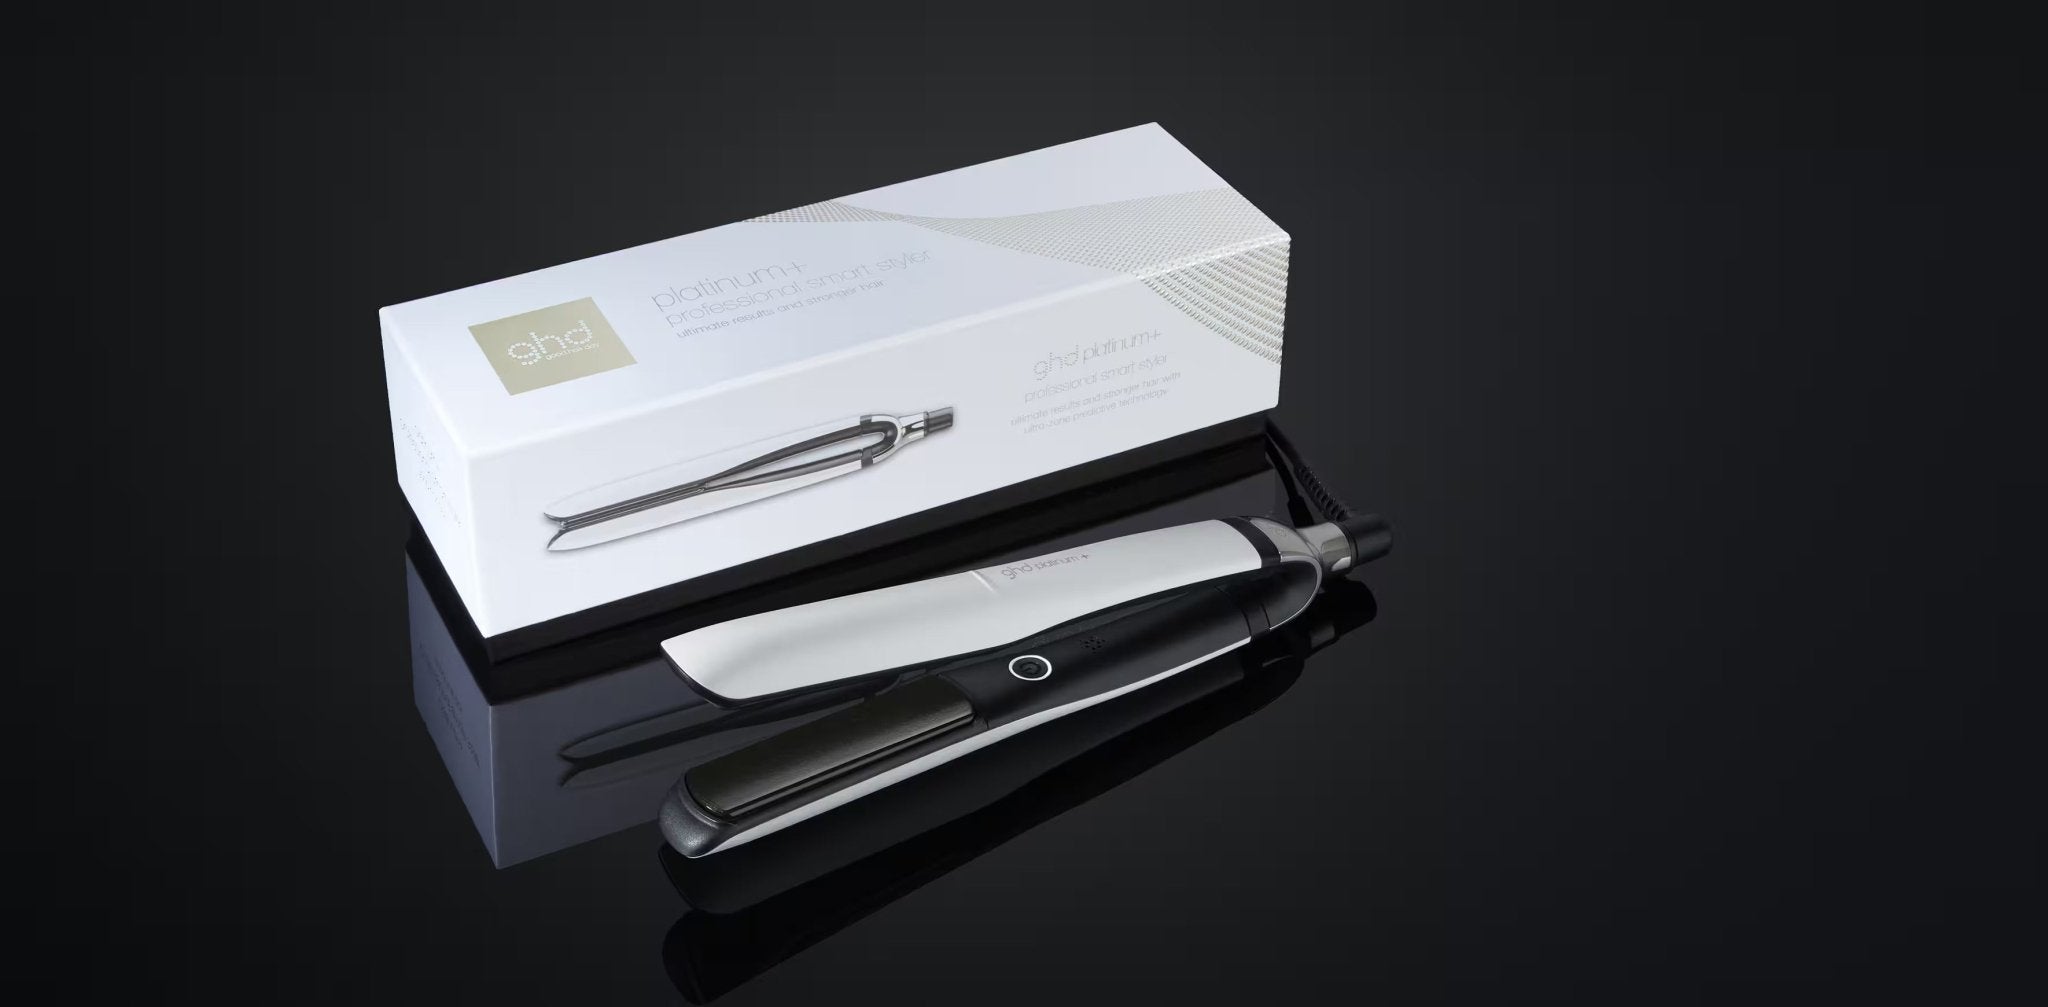 A black and silver GHD PLATINUM+ STYLER - 1" FLAT IRON lies next to its white packaging box with "GHD" branding, all set against a dark reflective surface, ready to deliver personalized results.